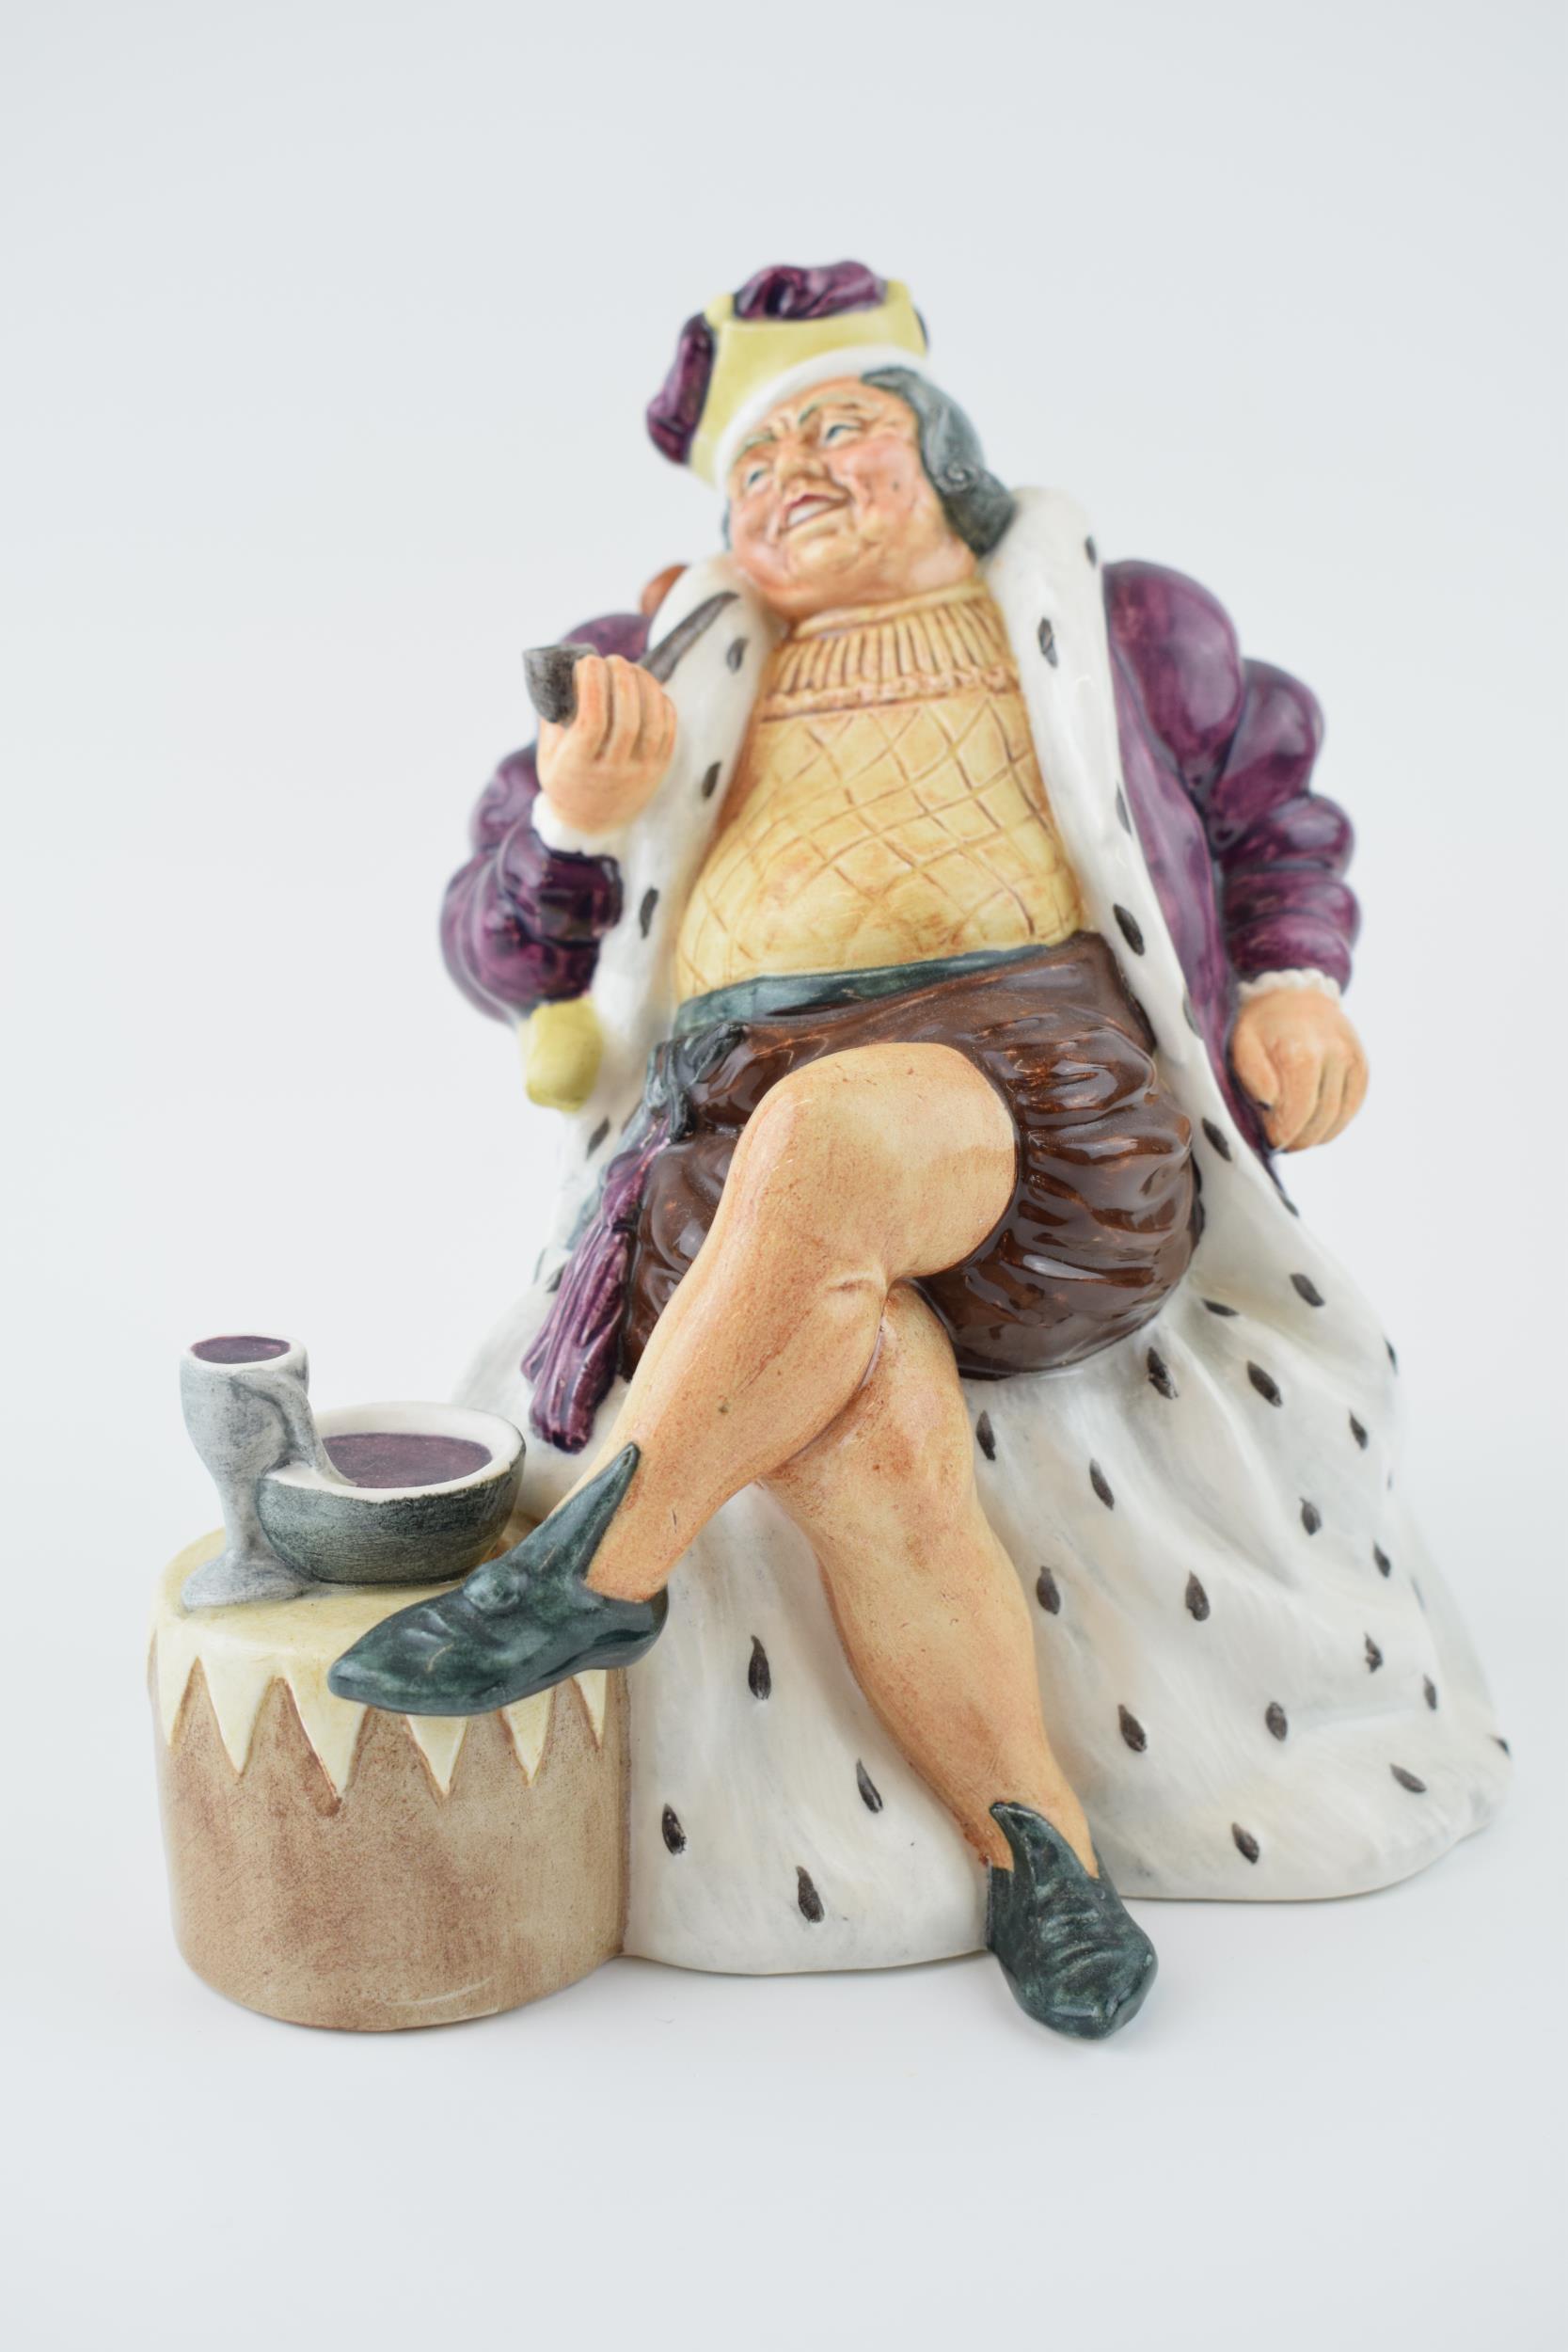 Royal Doulton figure Old King Cole HN2217. In good condition with no obvious damage or restoration.